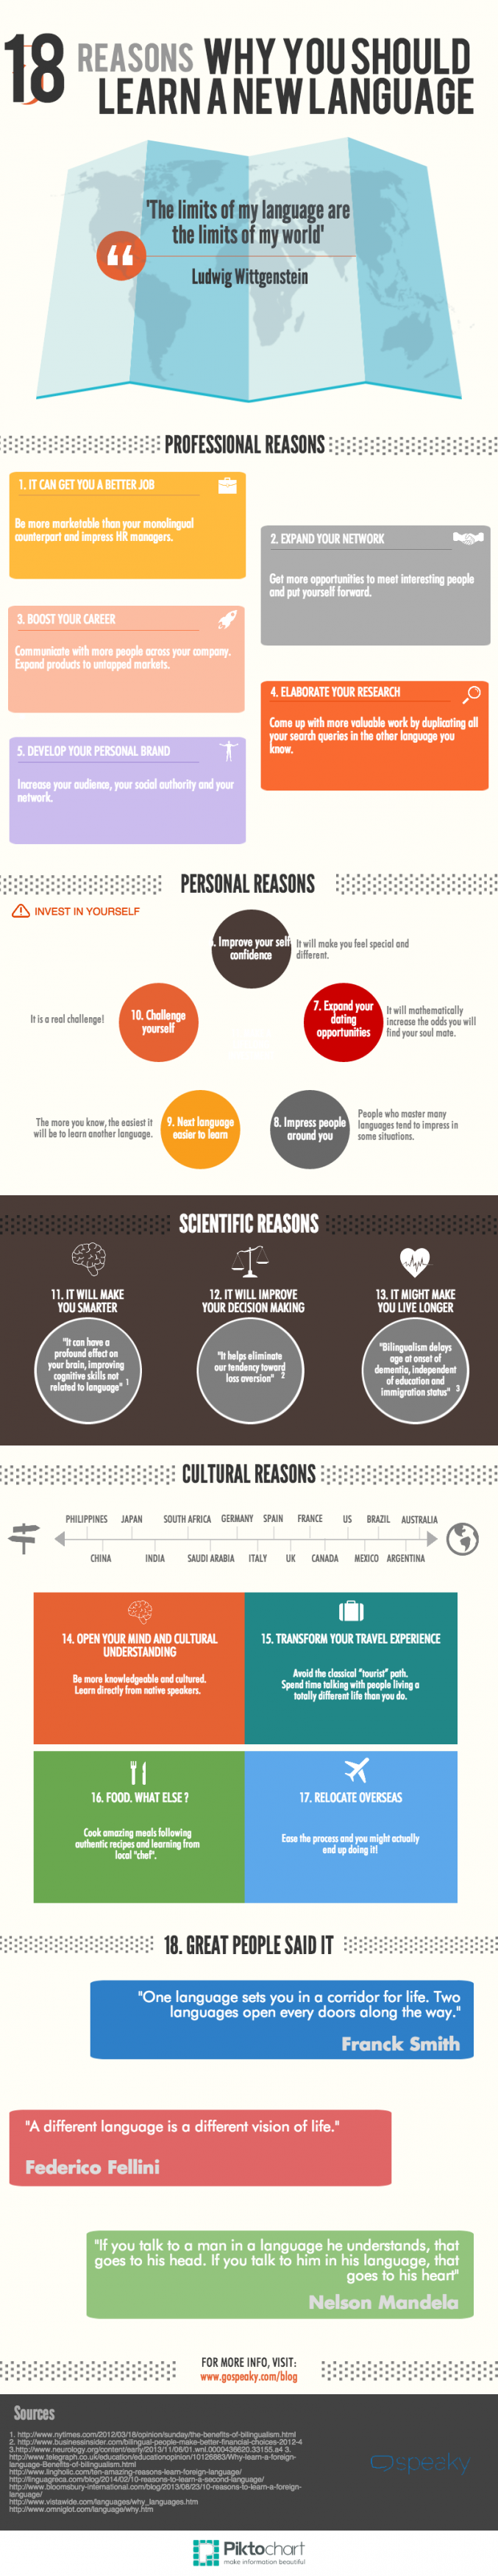 18 Reasons Why You Should Learn a New Language Infographic